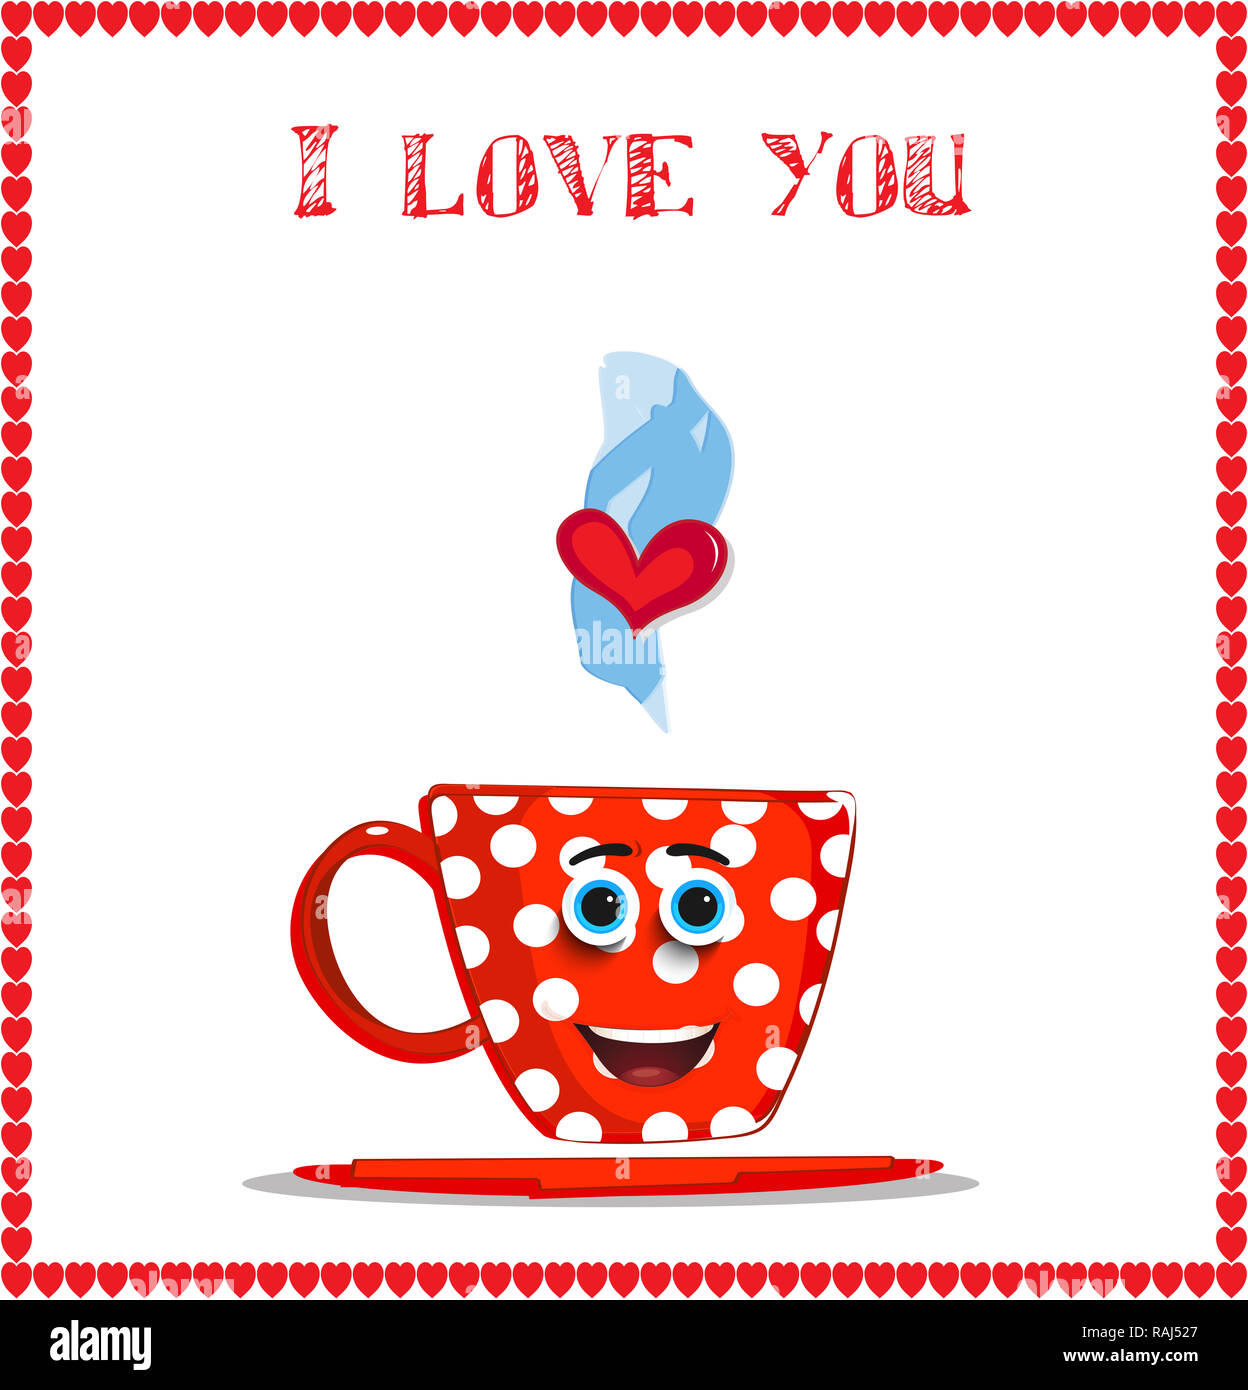 https://c8.alamy.com/comp/RAJ527/i-love-you-card-with-cute-smiling-red-mug-with-white-polka-dots-pattern-framed-with-hearts-border-illustration-love-clip-art-greeting-card-invit-RAJ527.jpg